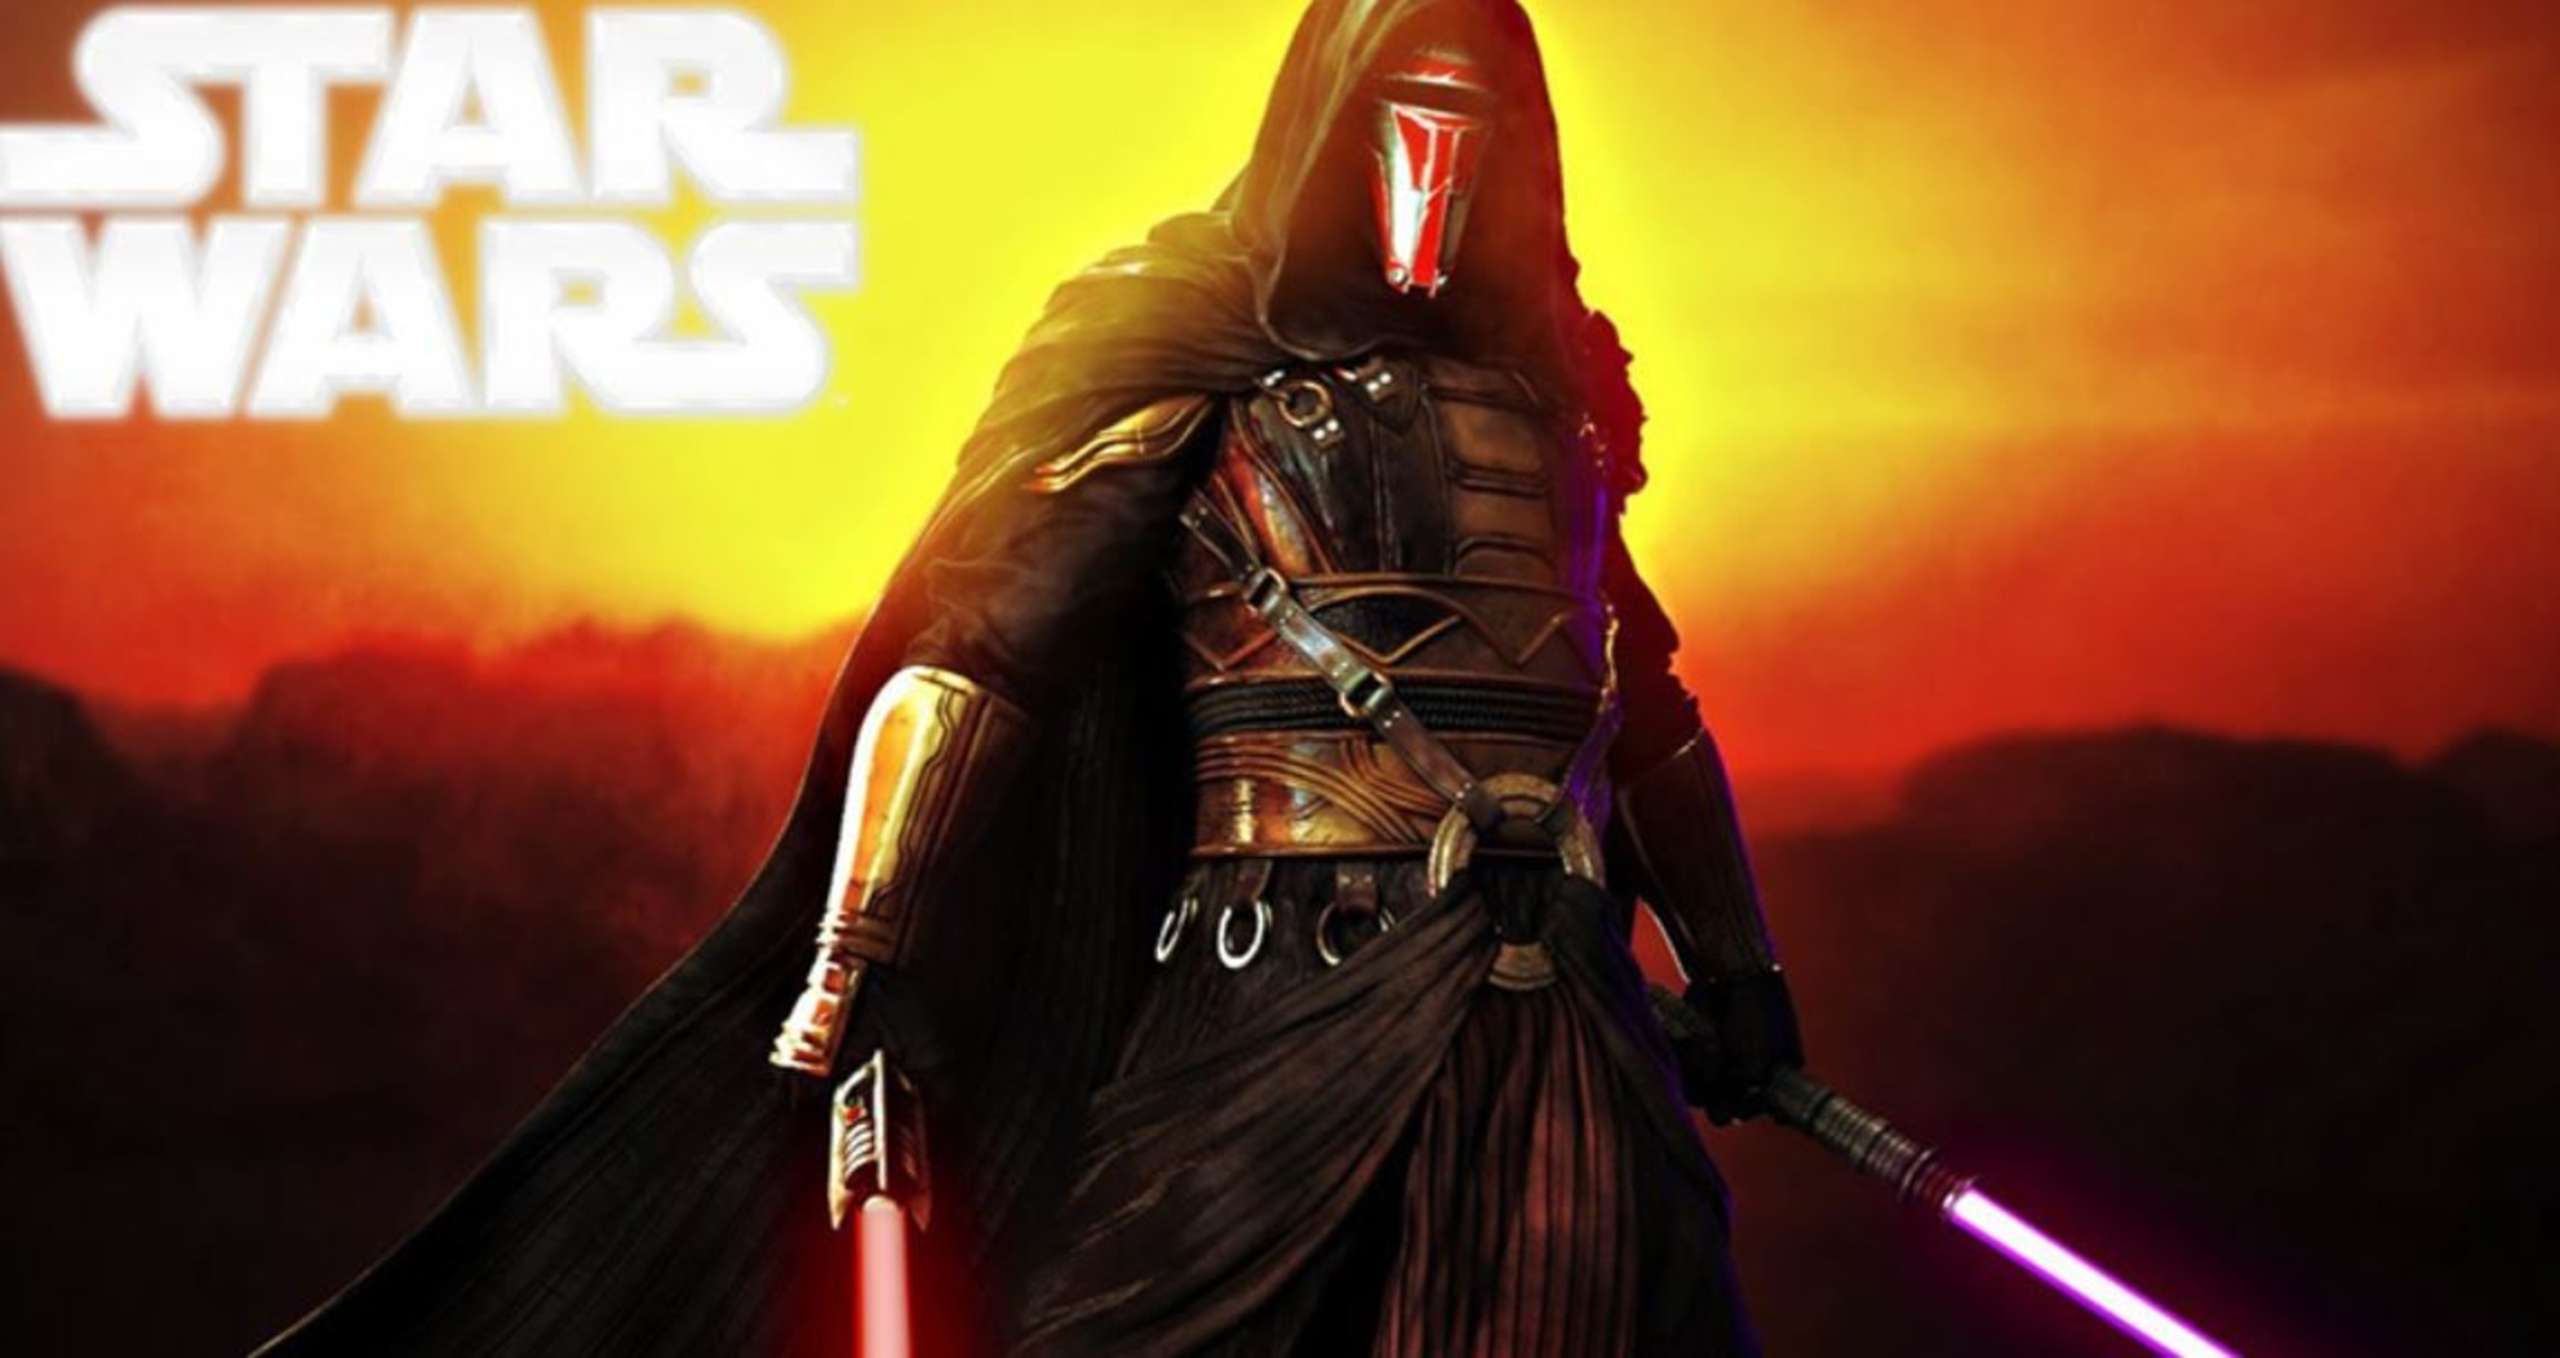 The Star Wars Video Game Series known As Knights Of The Old Republic KOTOR Is Still Widely Regarded As A Significant Entry In The Star Wars Gaming Canon